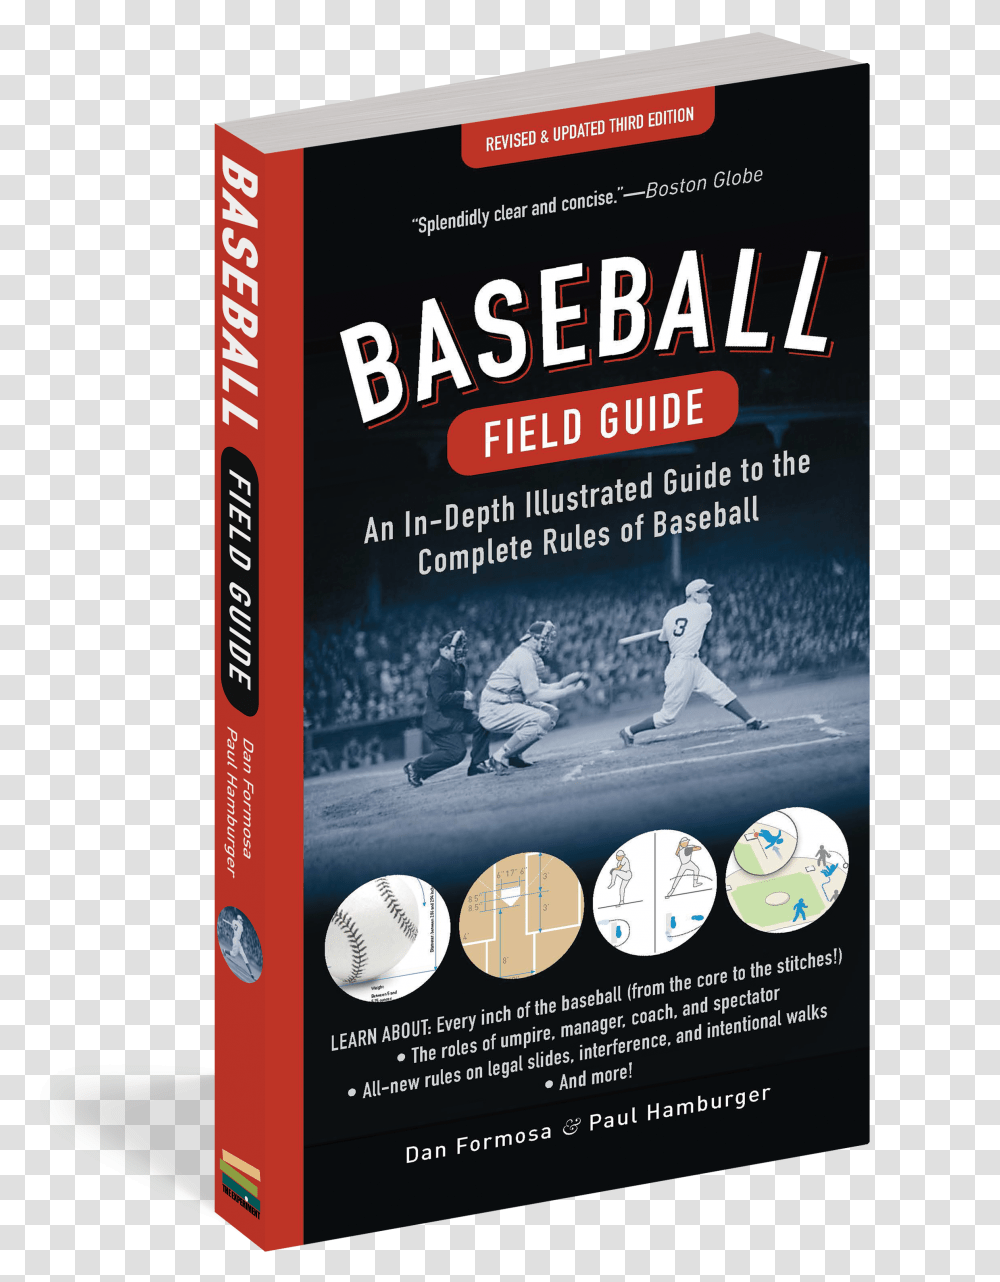 Download Baseball Field Guide Full Size Image Pngkit Baseball Field An Illustrated Guide To The Complete Rules Of Baseball,  Transparent Png